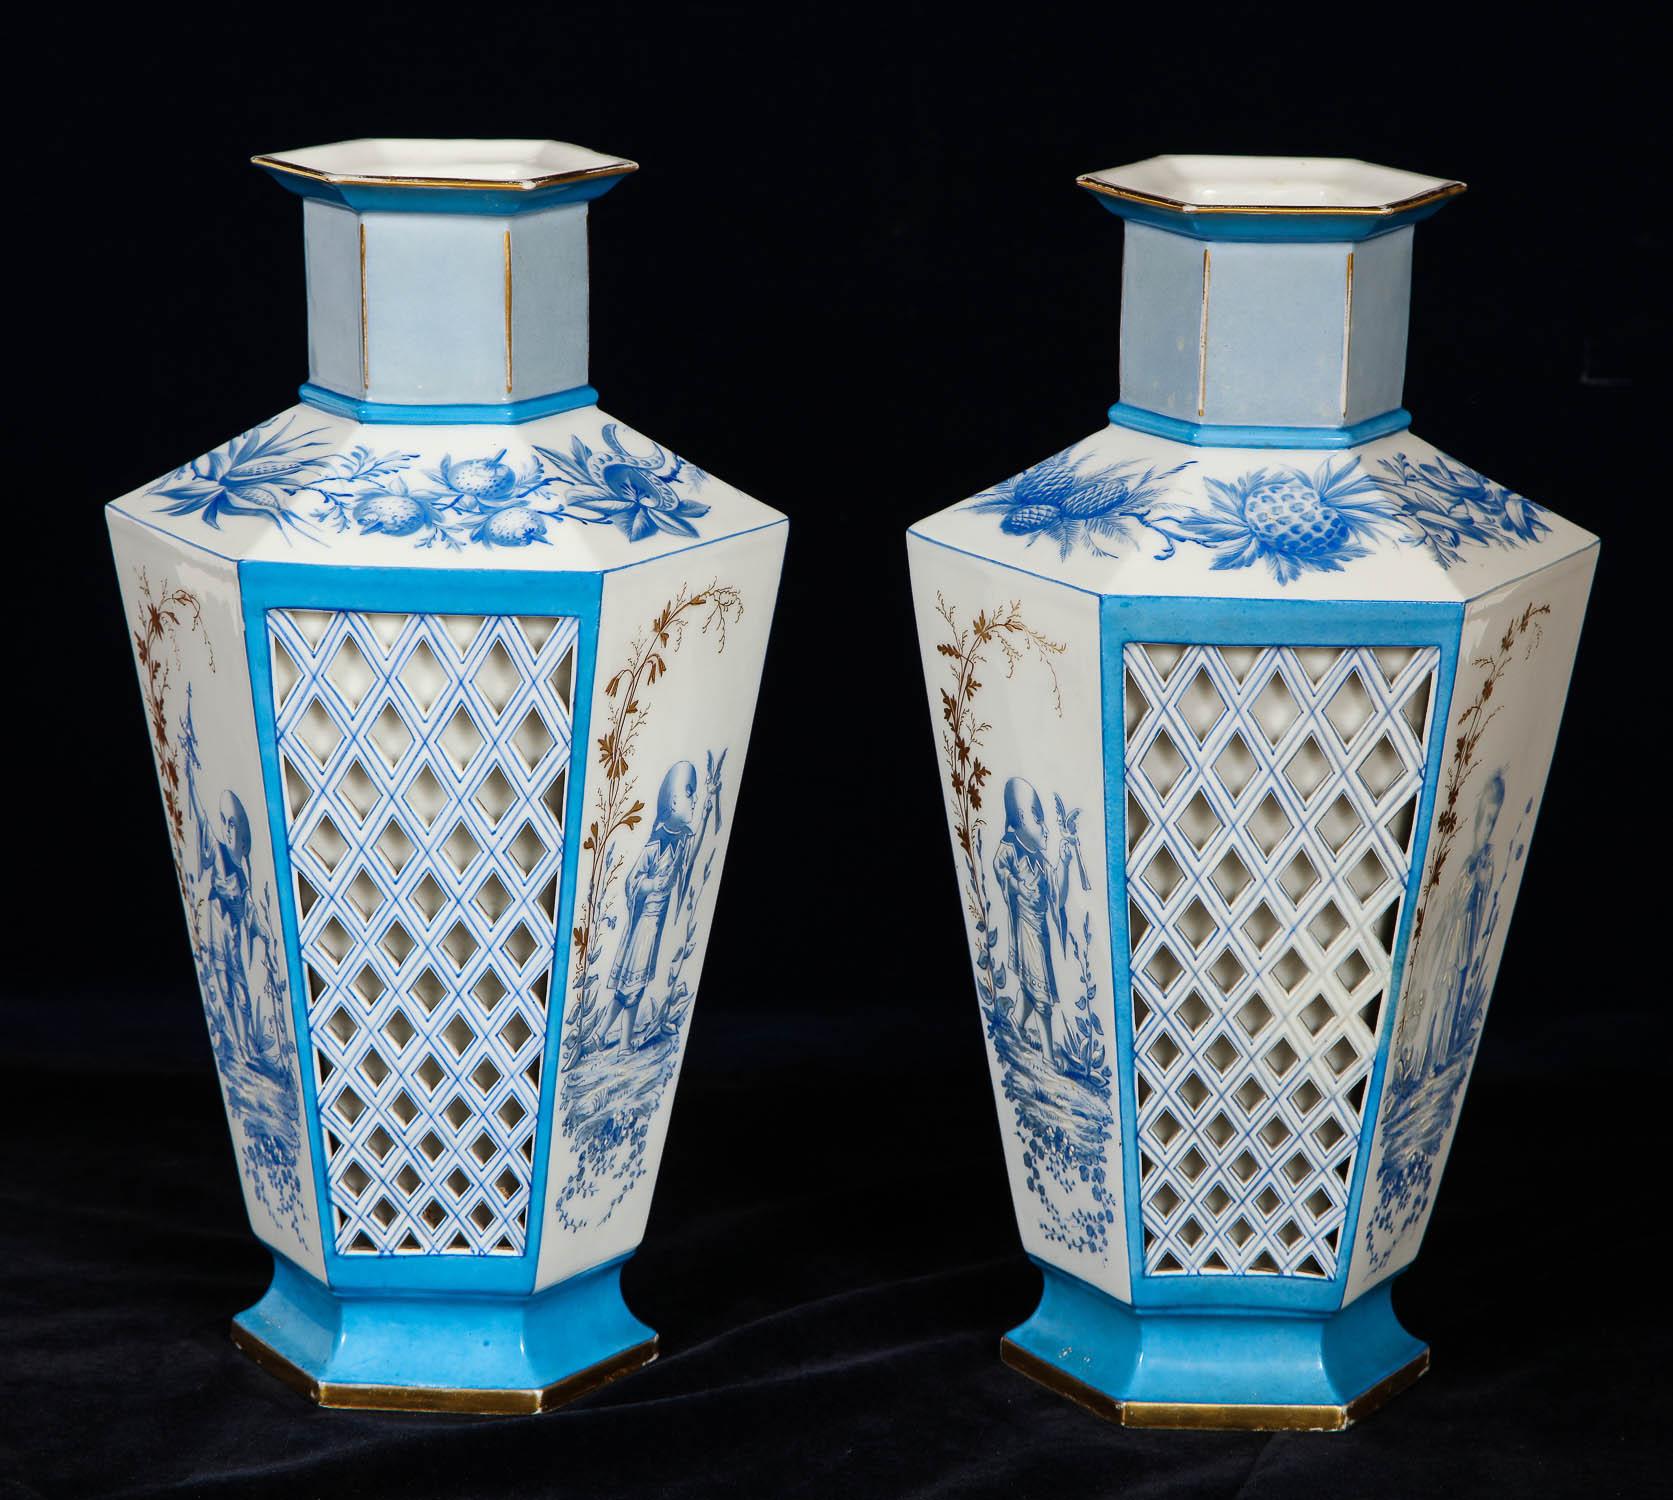 Late 19th Century Pair of French Paris Porcelain Blue and White Chinoiserie Style Open-Work Vases For Sale